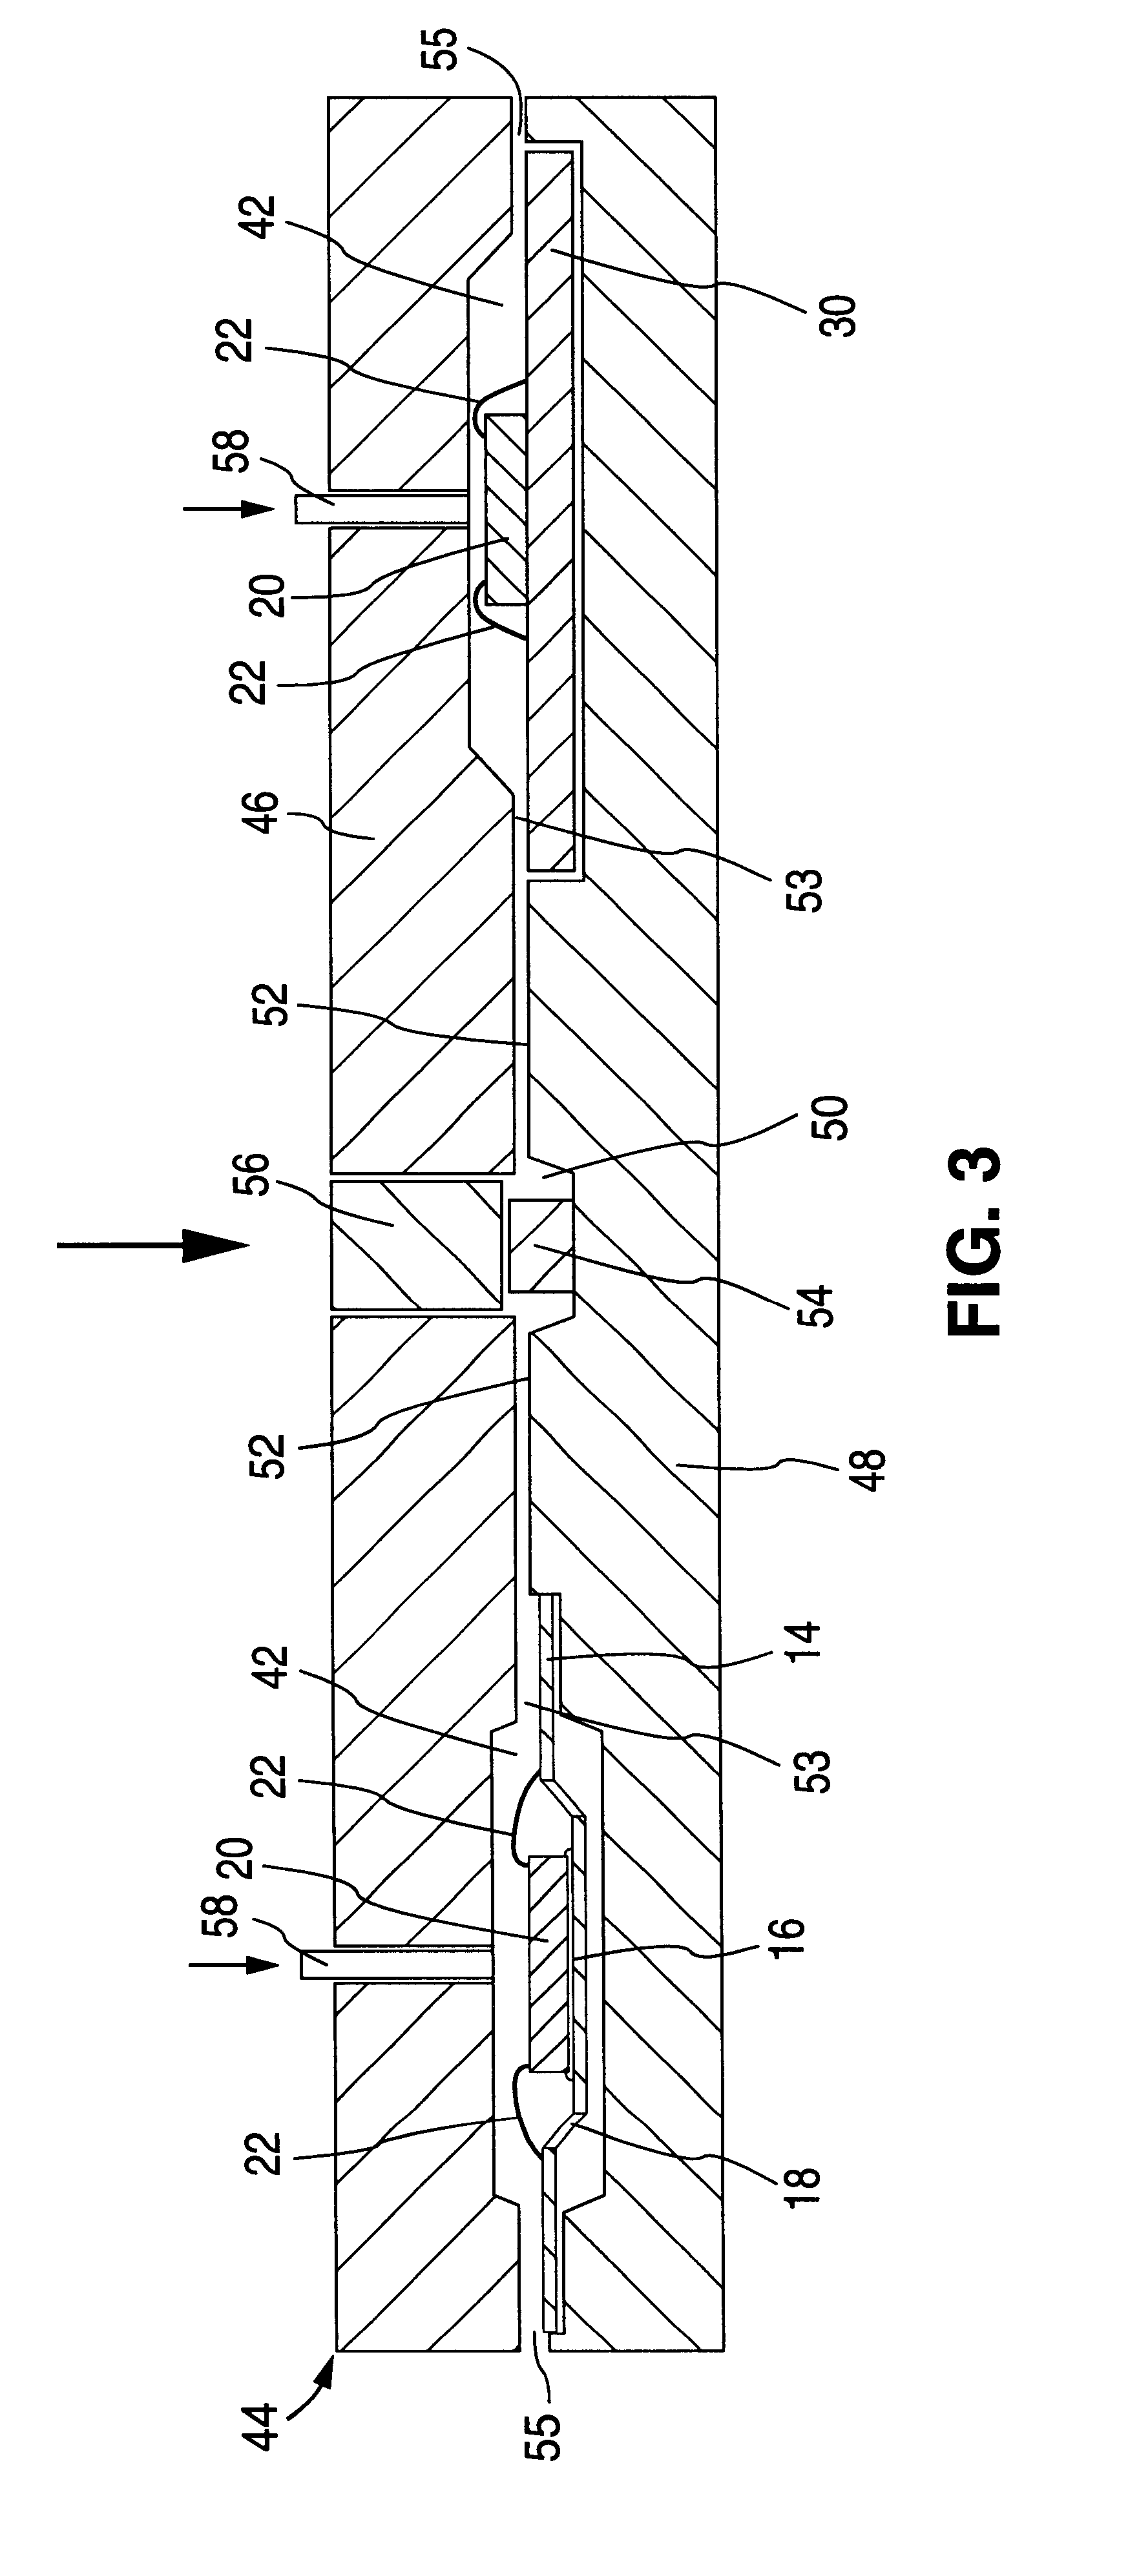 Method of molding plastic semiconductor packages